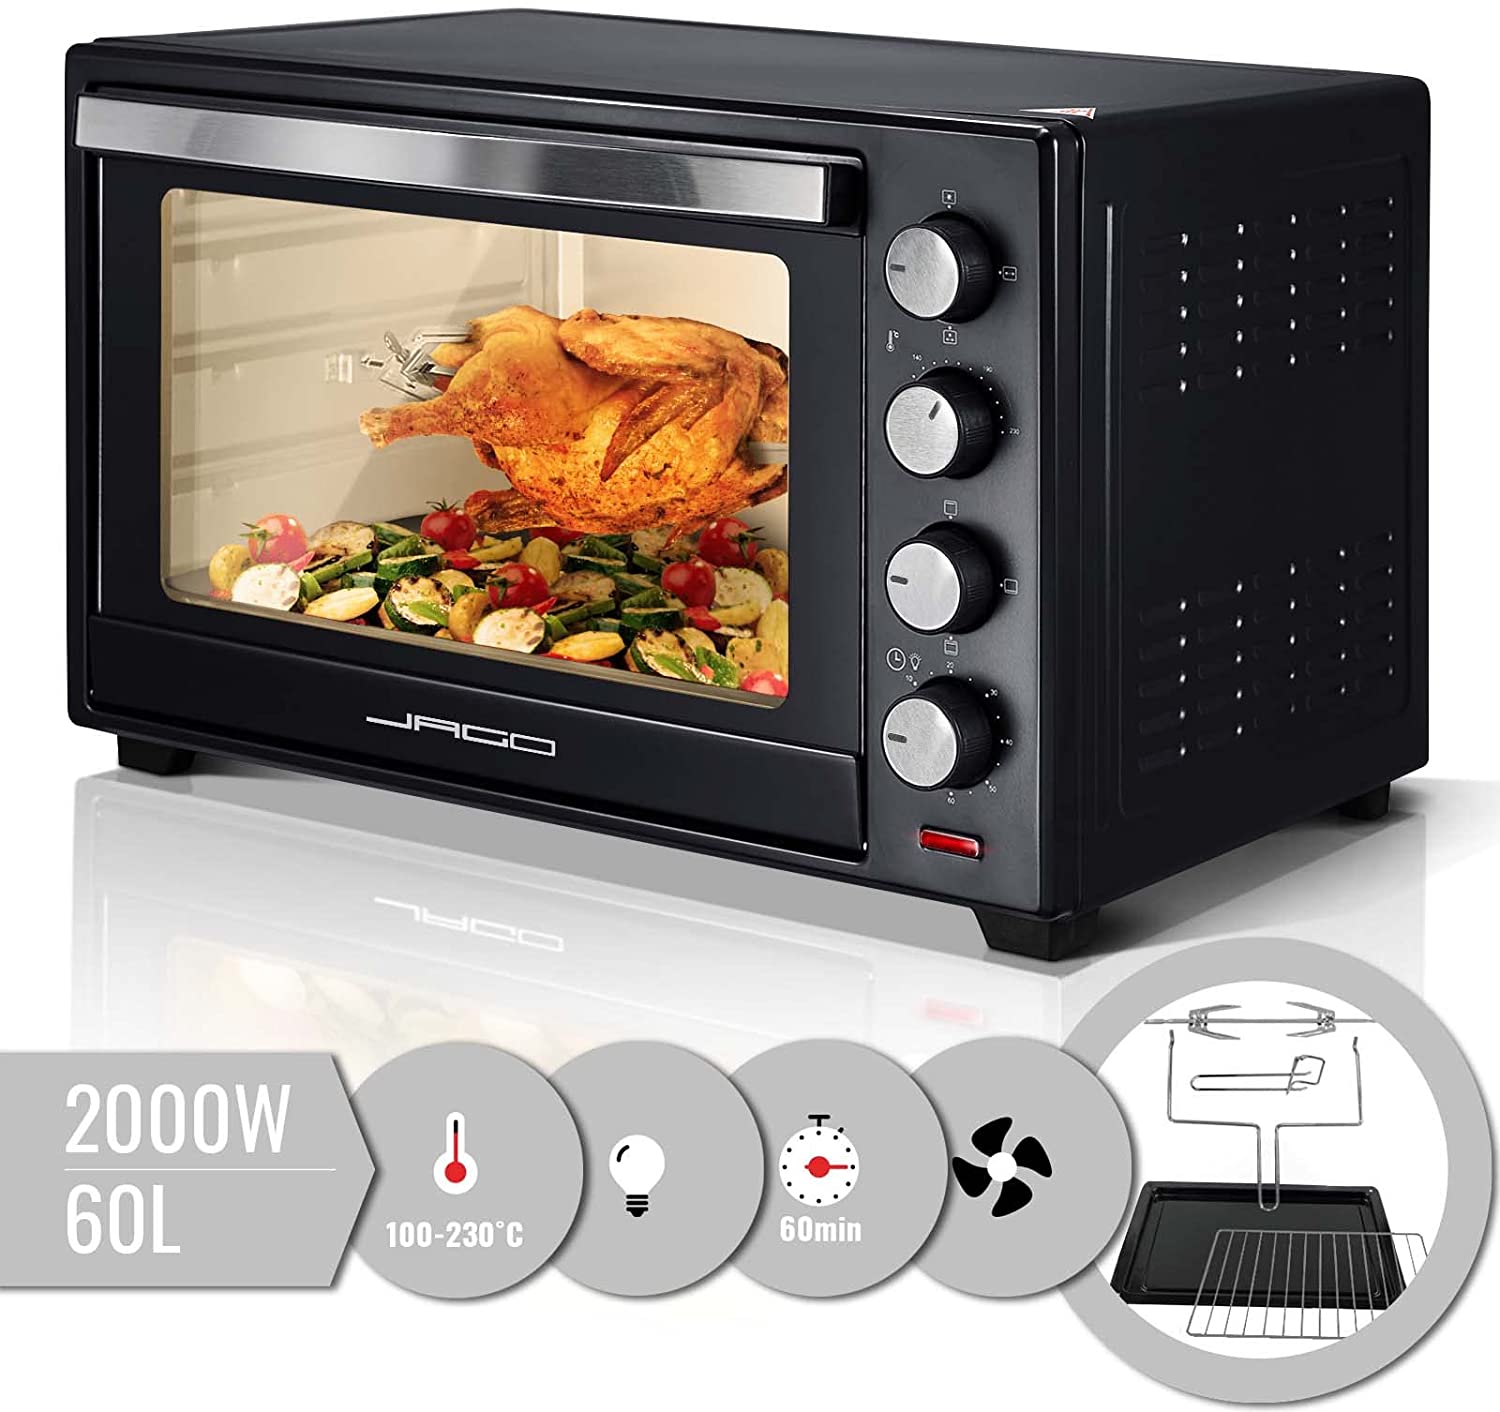 Jago® Mini Oven with Recirculation - Interior Lighting, Electric, Double Glass Door, Timer, 100-230°, 2000W, 60L, 5 Heat Types, Rotisserie Spit, Black - Mini Oven, Mini Kitchen, Barbecue, Pizza Oven